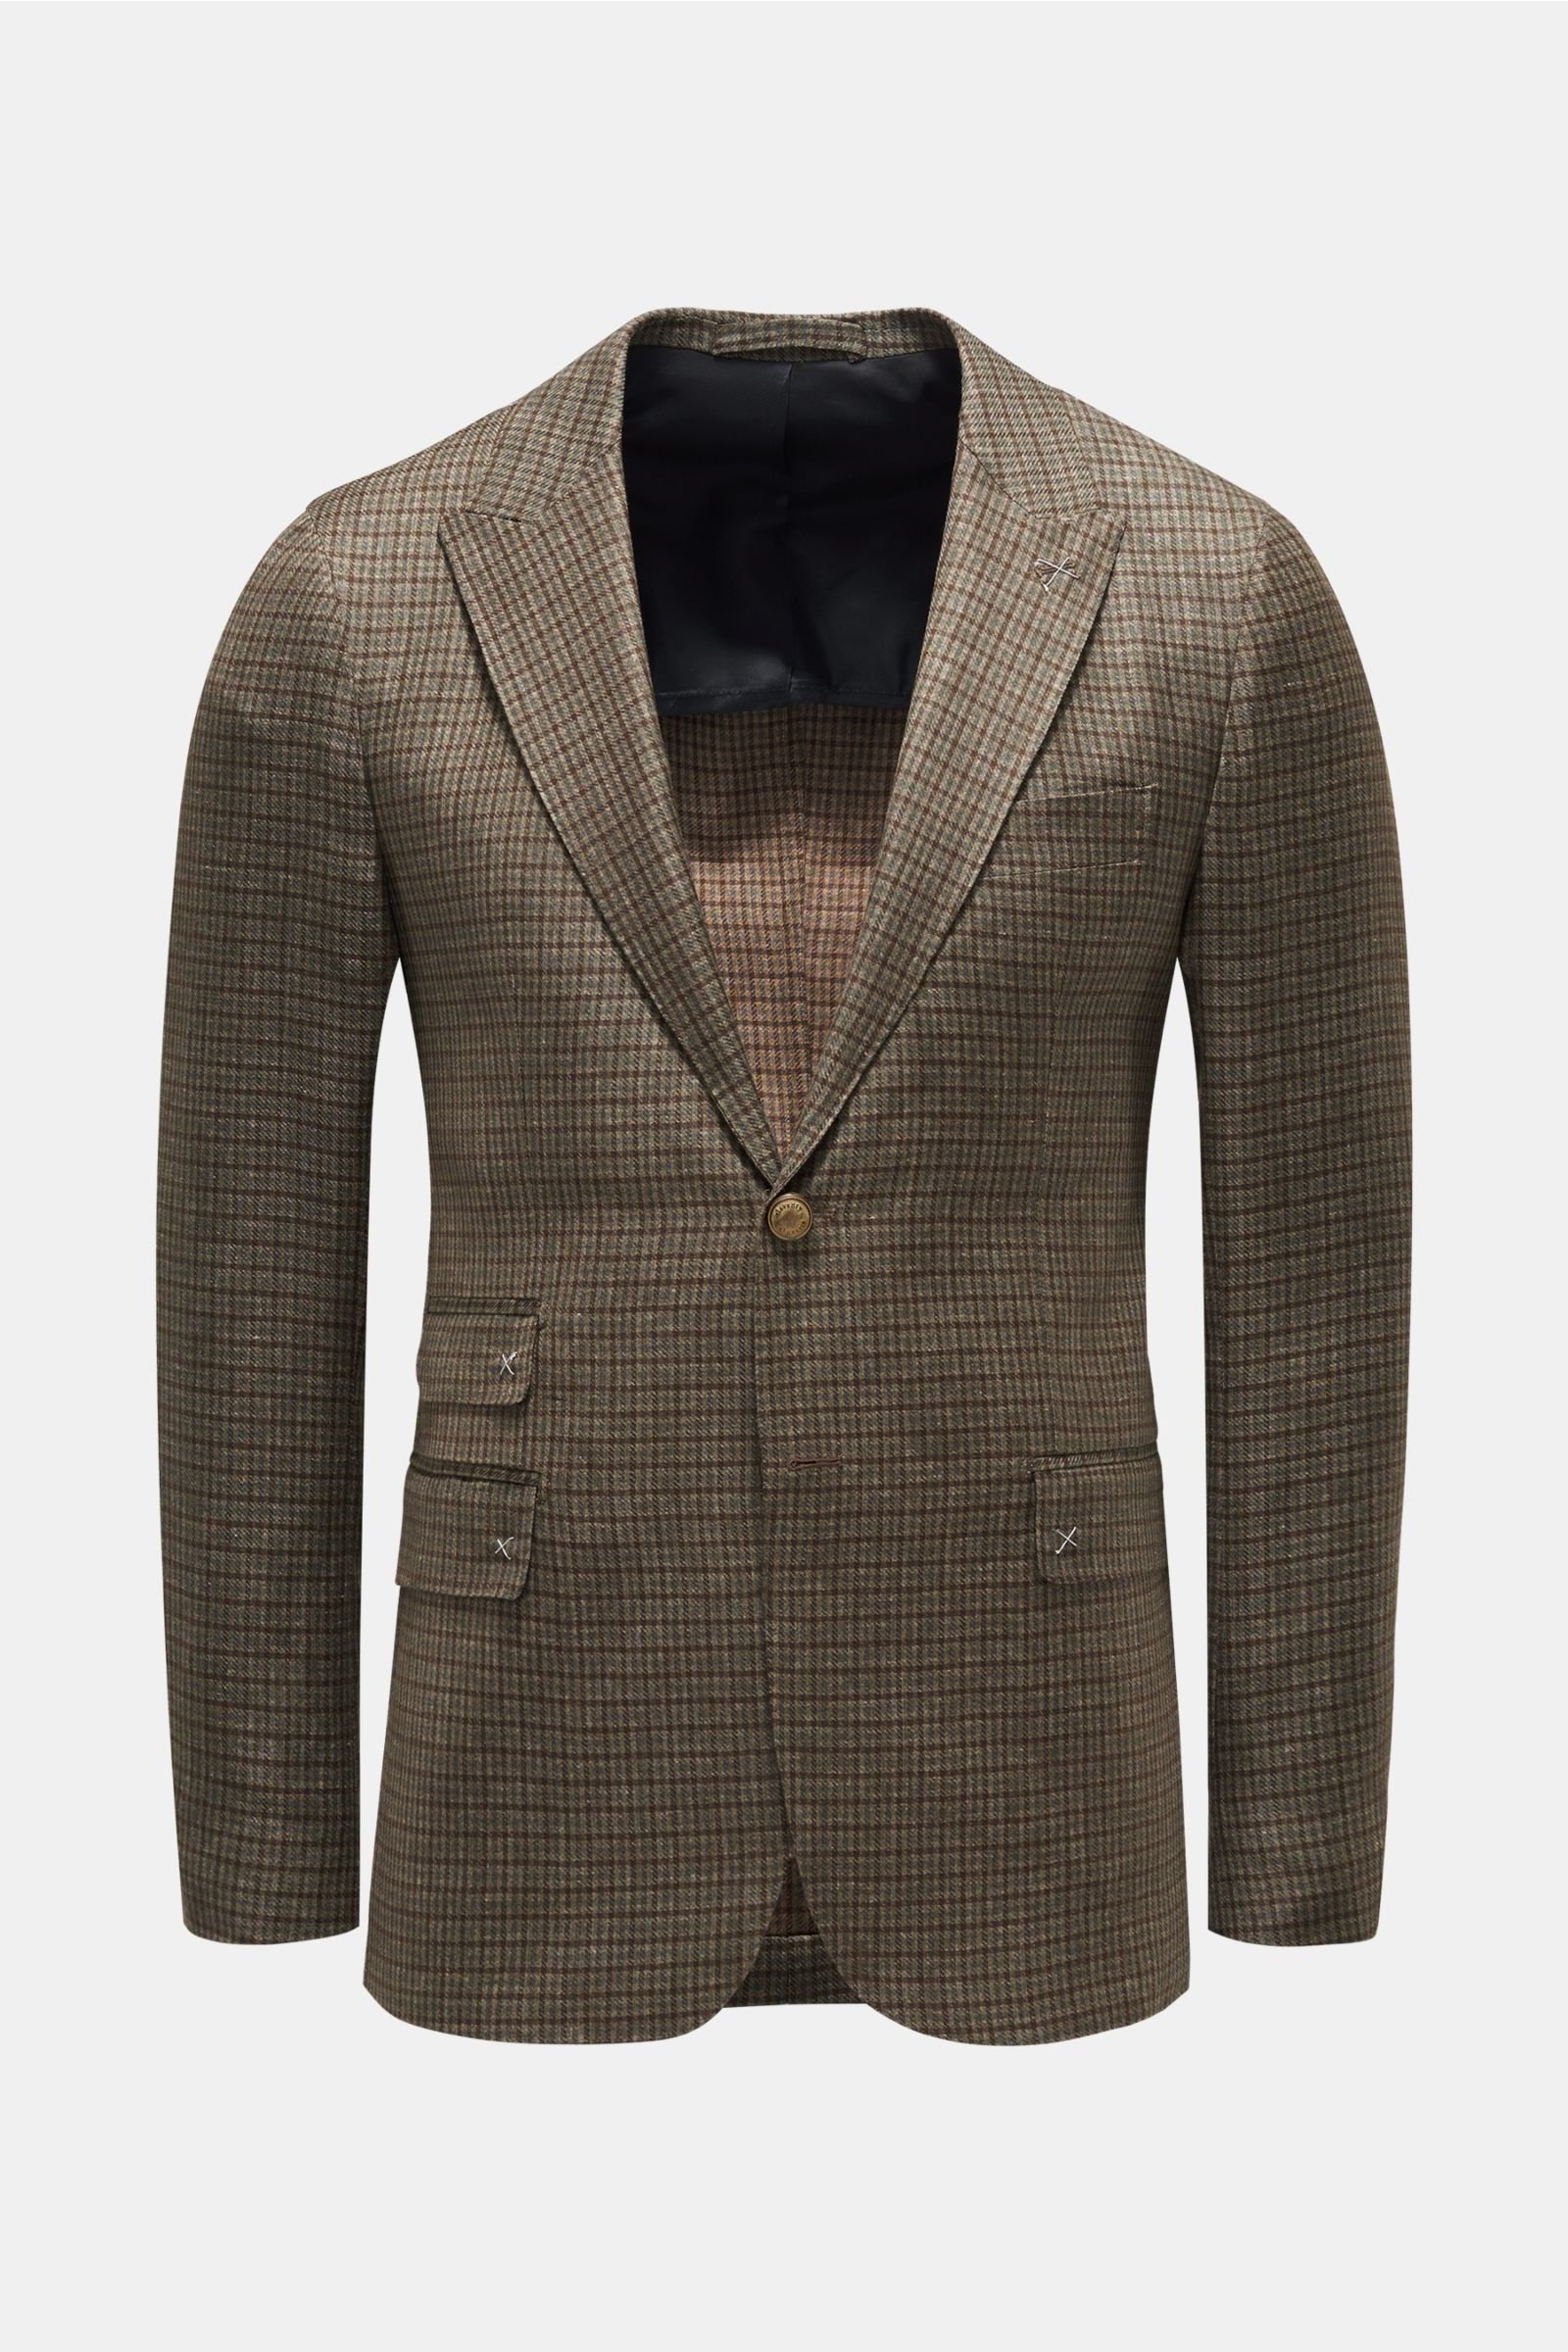 Smart-casual jacket brown/grey-green checked